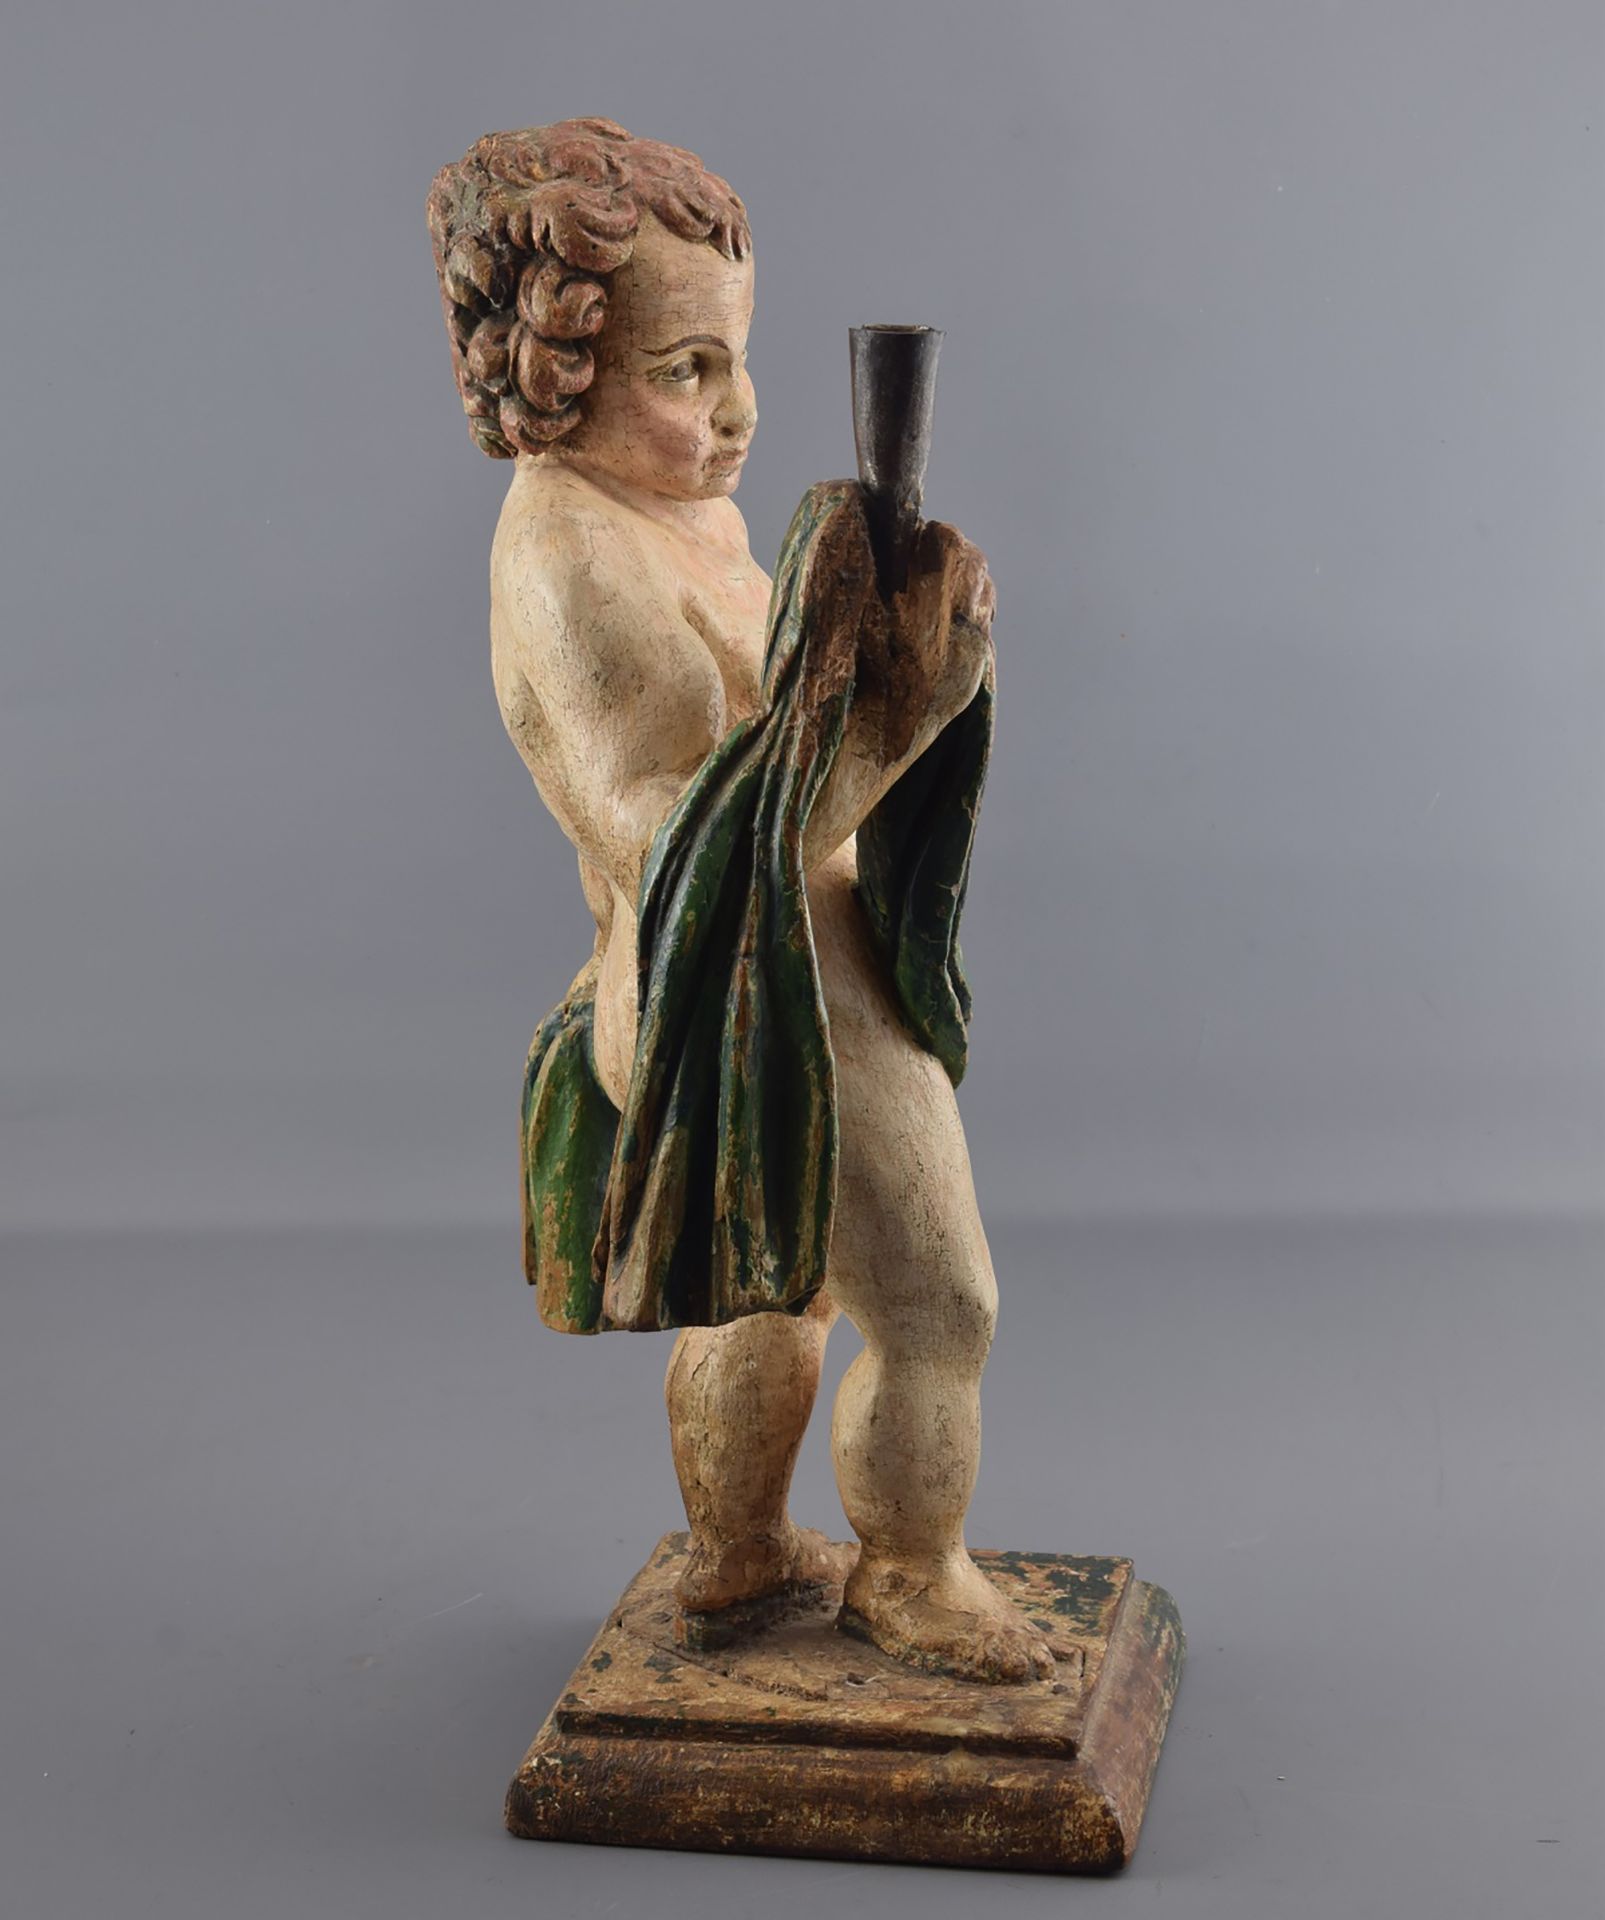 Romanist torchlighter from the 16th century - early 17th century - Bild 5 aus 6